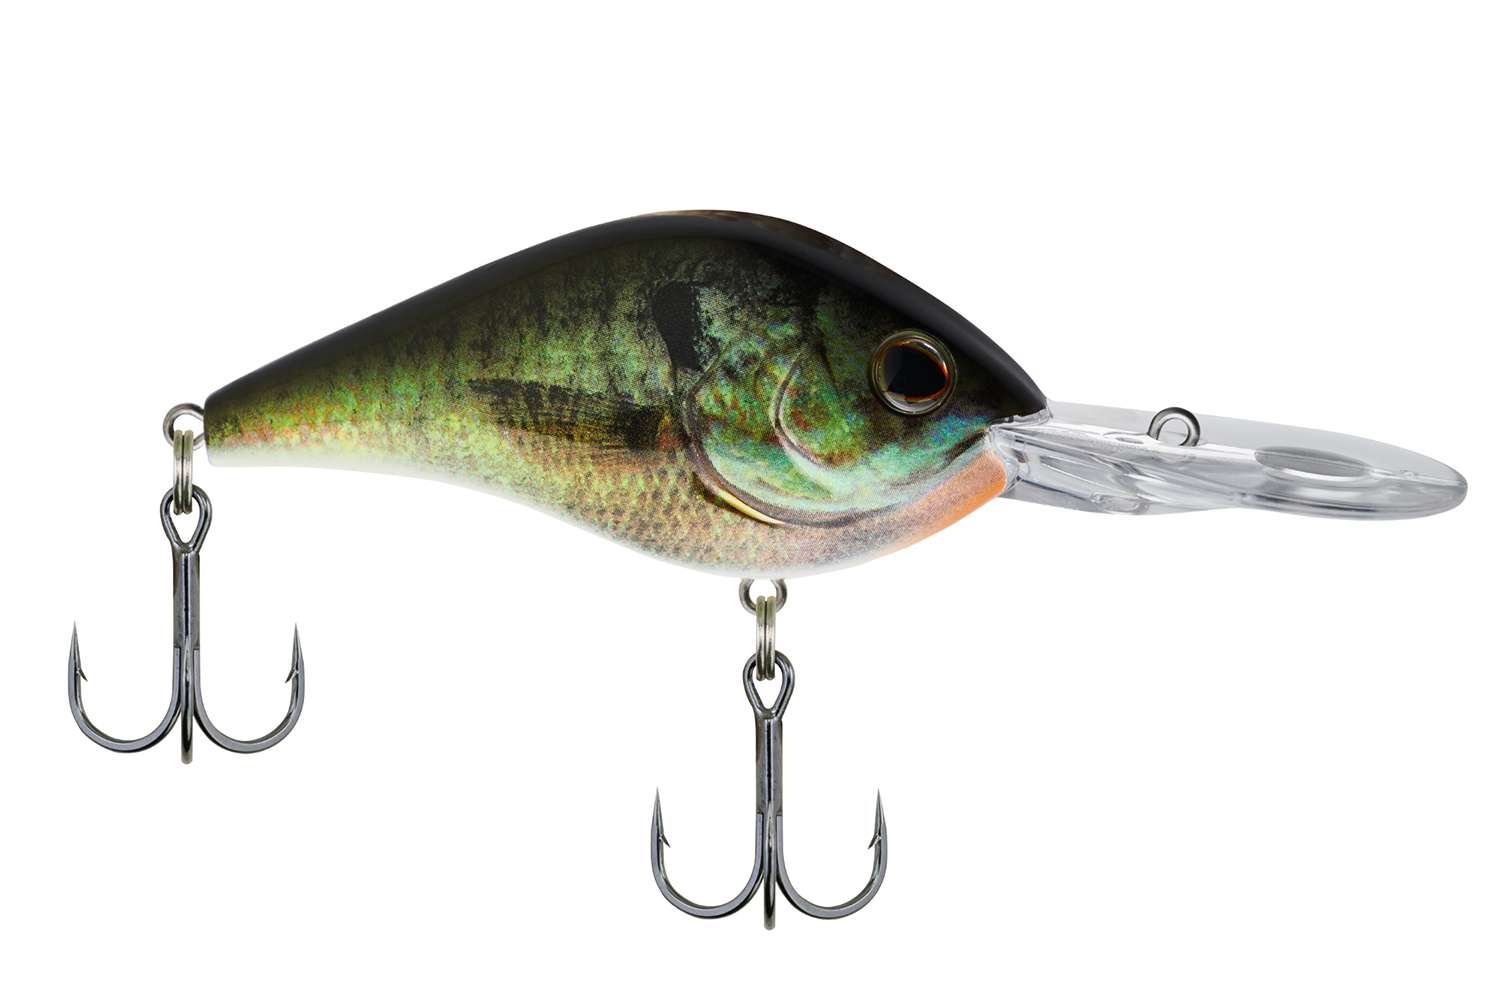 <p><b>Berkley Dredger HD Colors</b></p>

<p>A favorite among anglers, the Berkley Dredger was the result of pairing Berkley scientists with legendary crankbait angler, David Fritts. The Dredger features a body shape and weighted bill to drive the bait deep and keep it in the strike zone faster, and a tight subtle action that is best for deep water fish. This bait casts great and is easy to crank for less fatigue when fishing all day. New HD Colors available September 2020.</p>
<p><a href=